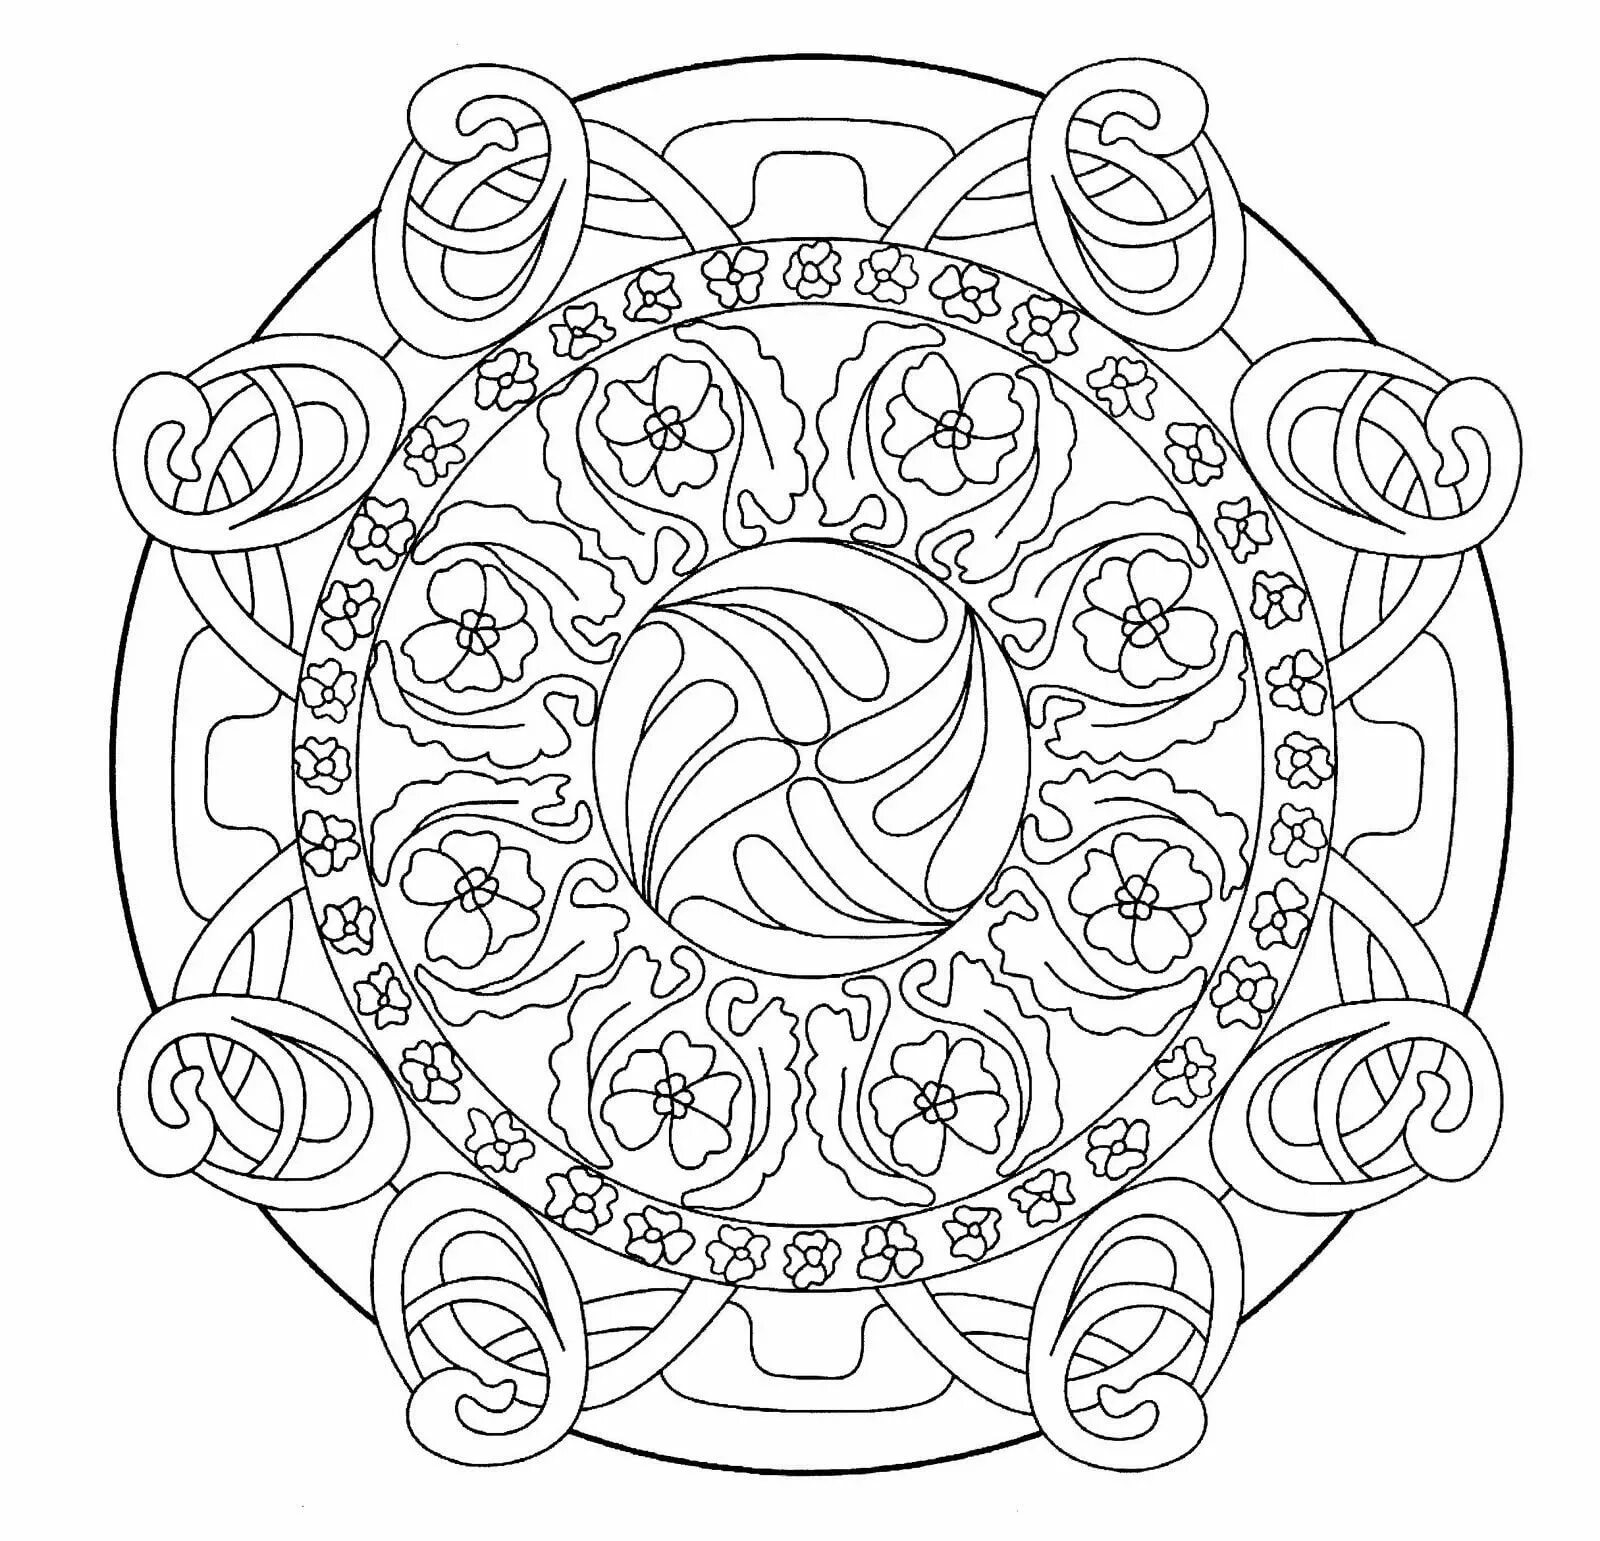 Exquisite coloring mandala for good luck and prosperity